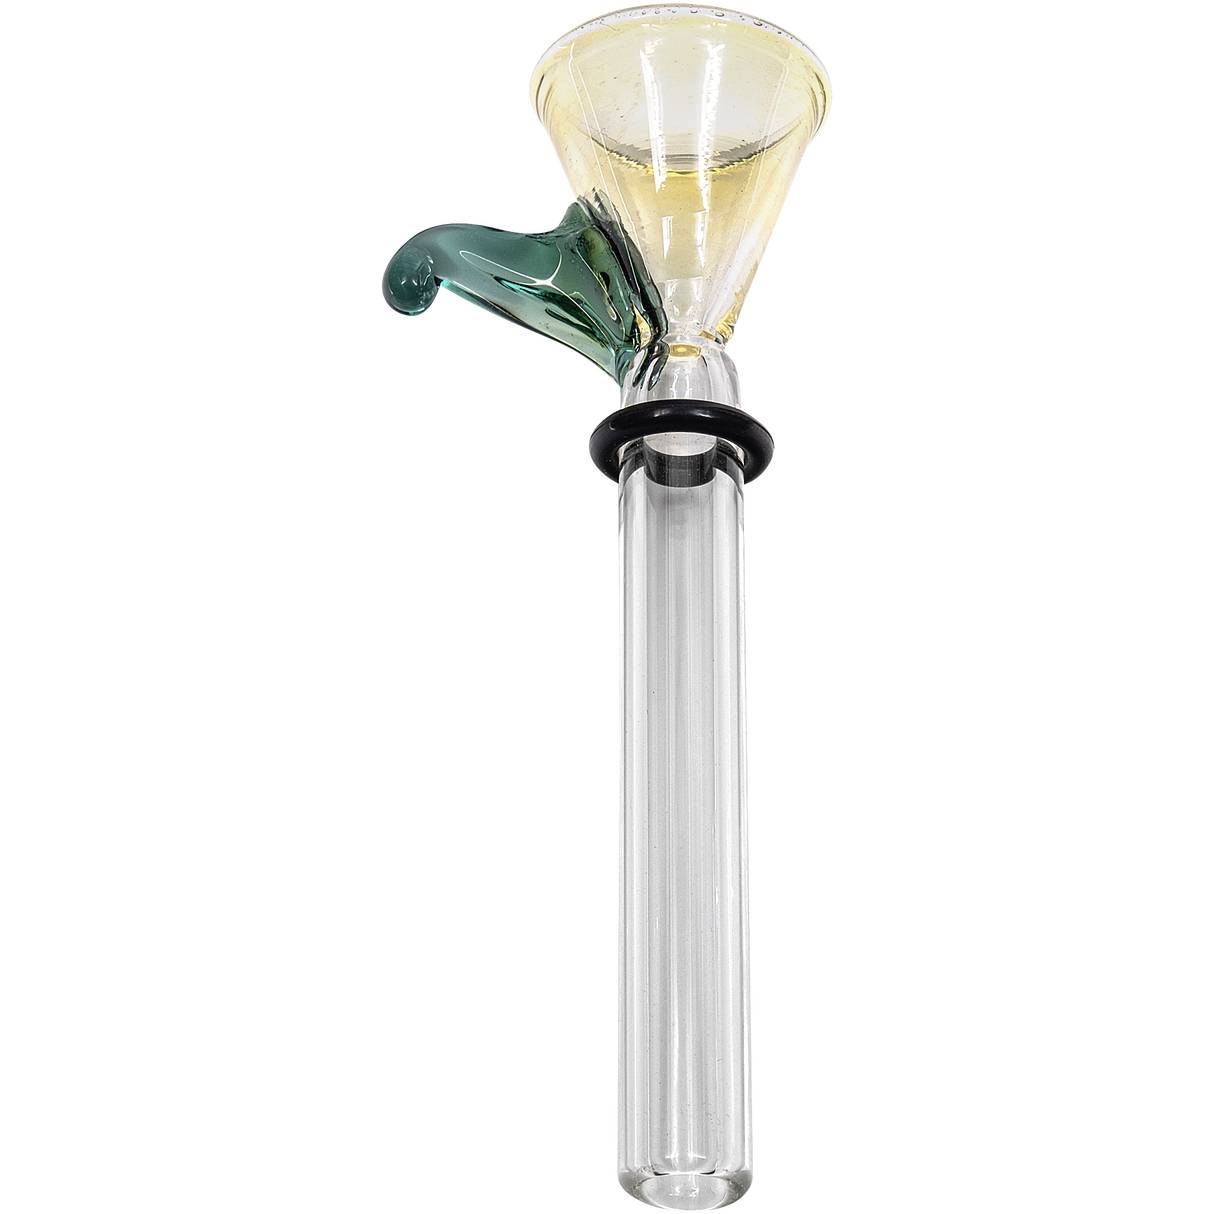 LA Pipes 9mm Funnel Slide Bowl with Handle for Bongs, Borosilicate Glass, Front View